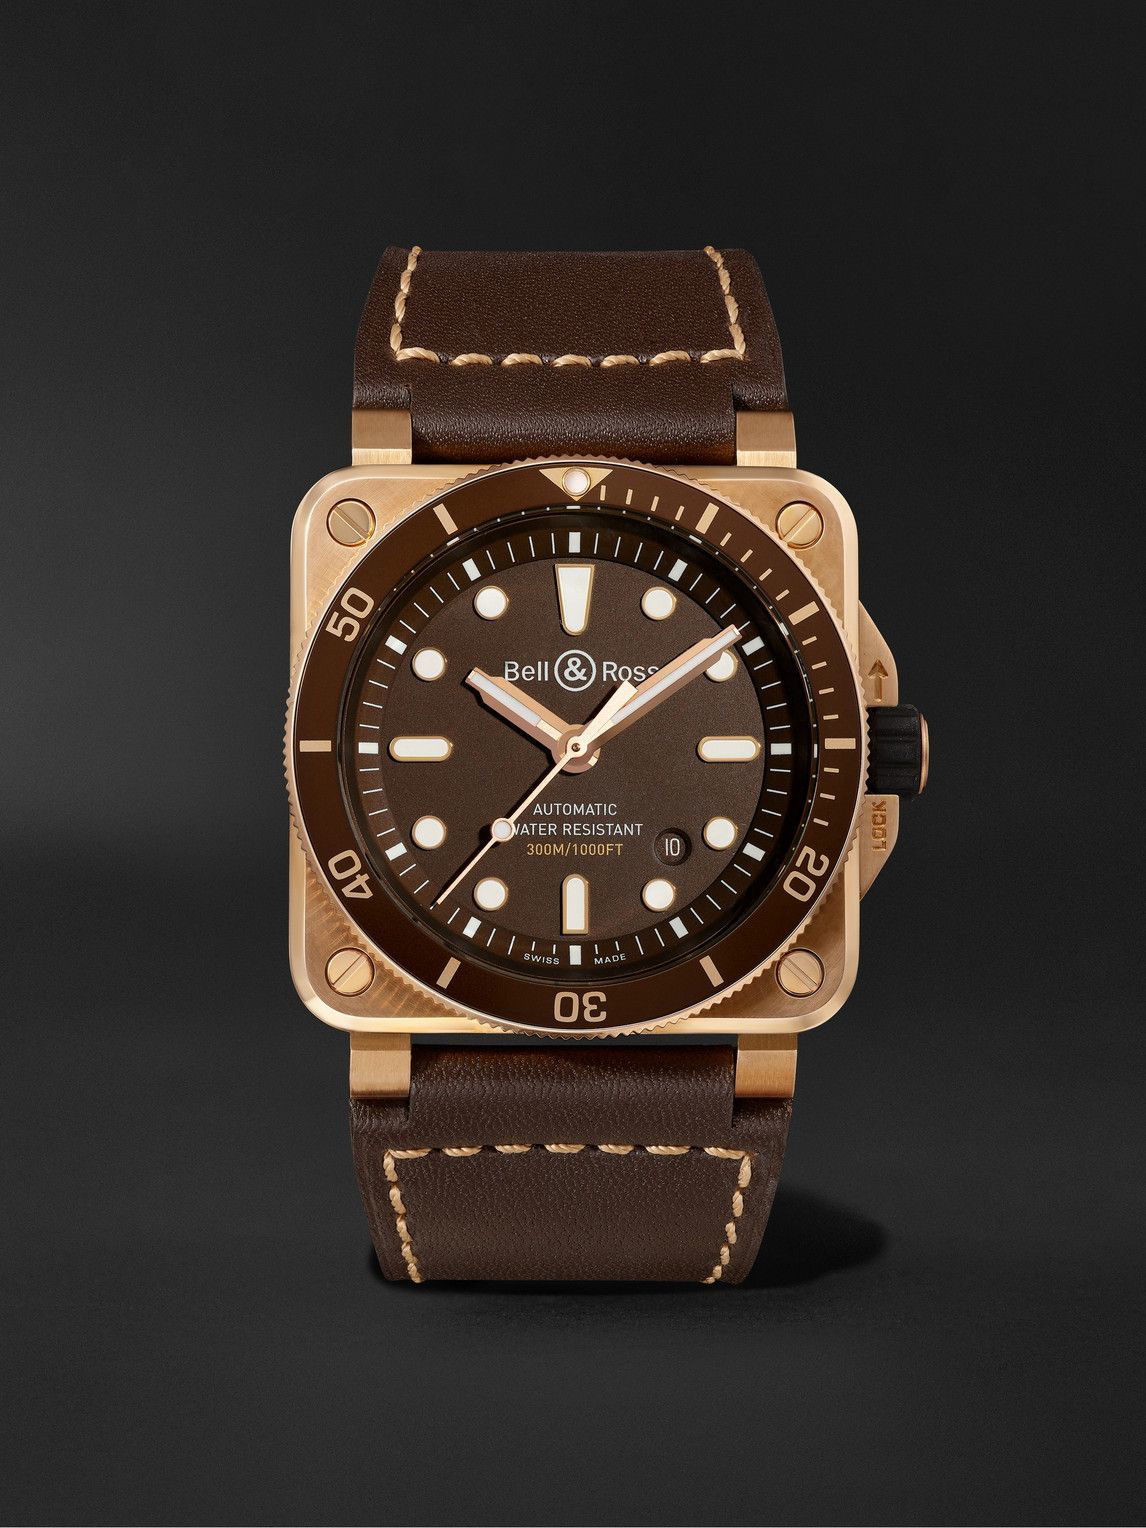 Bell - BR 03-92 Diver Limited Edition Automatic 42mm Bronze and Leather Watch, Ref.No R0392-D-BR-BR/SCA Bell & Ross